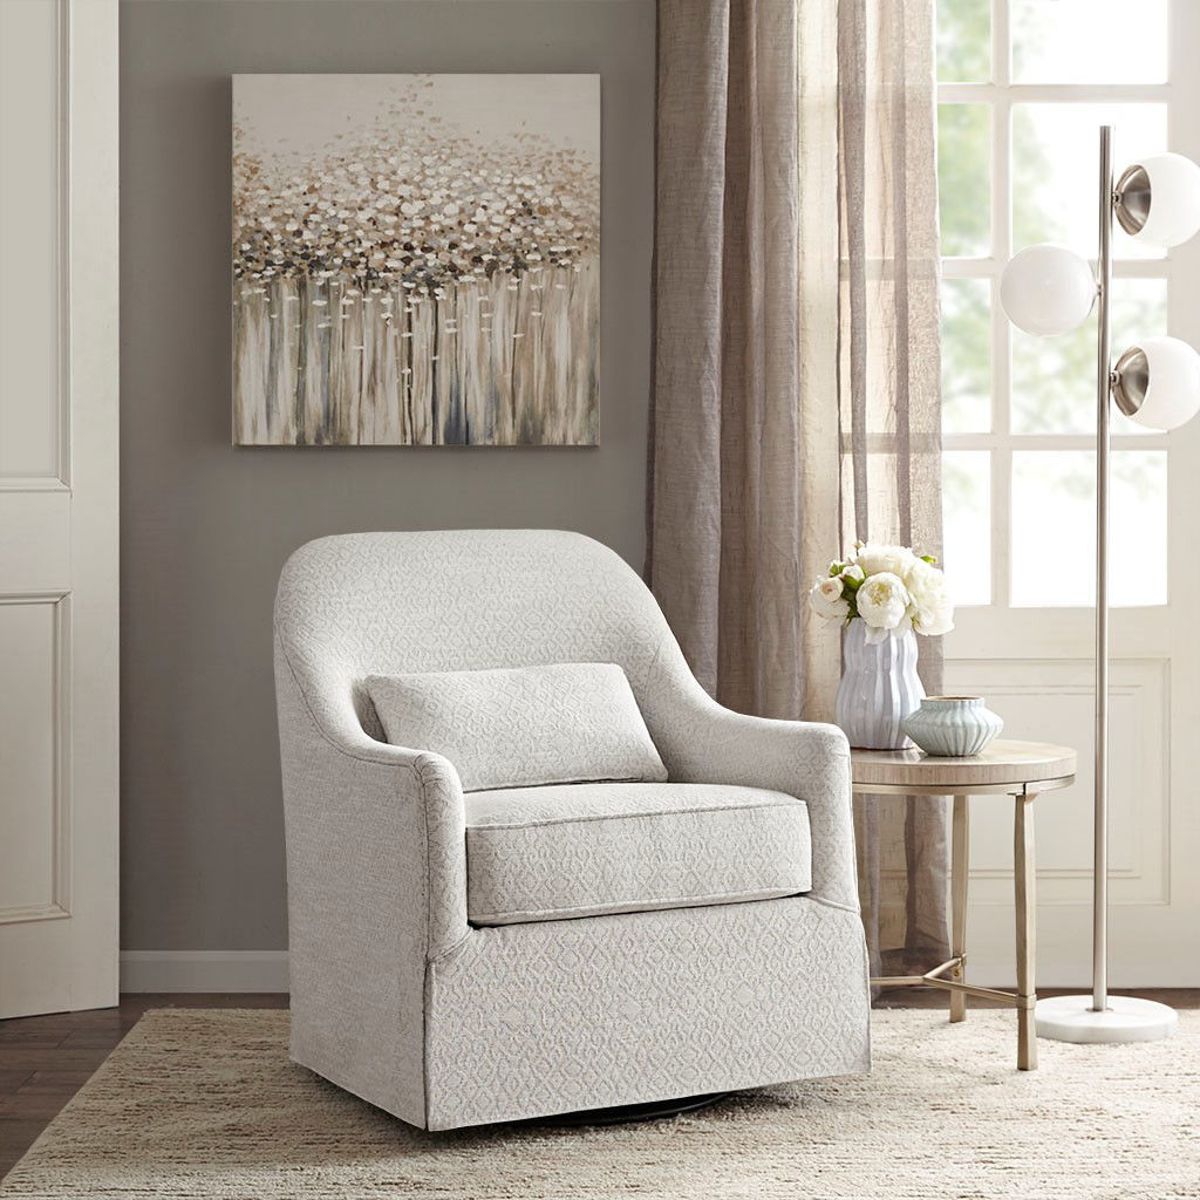 Picture of THEO SWIVEL GLIDER CHAIR